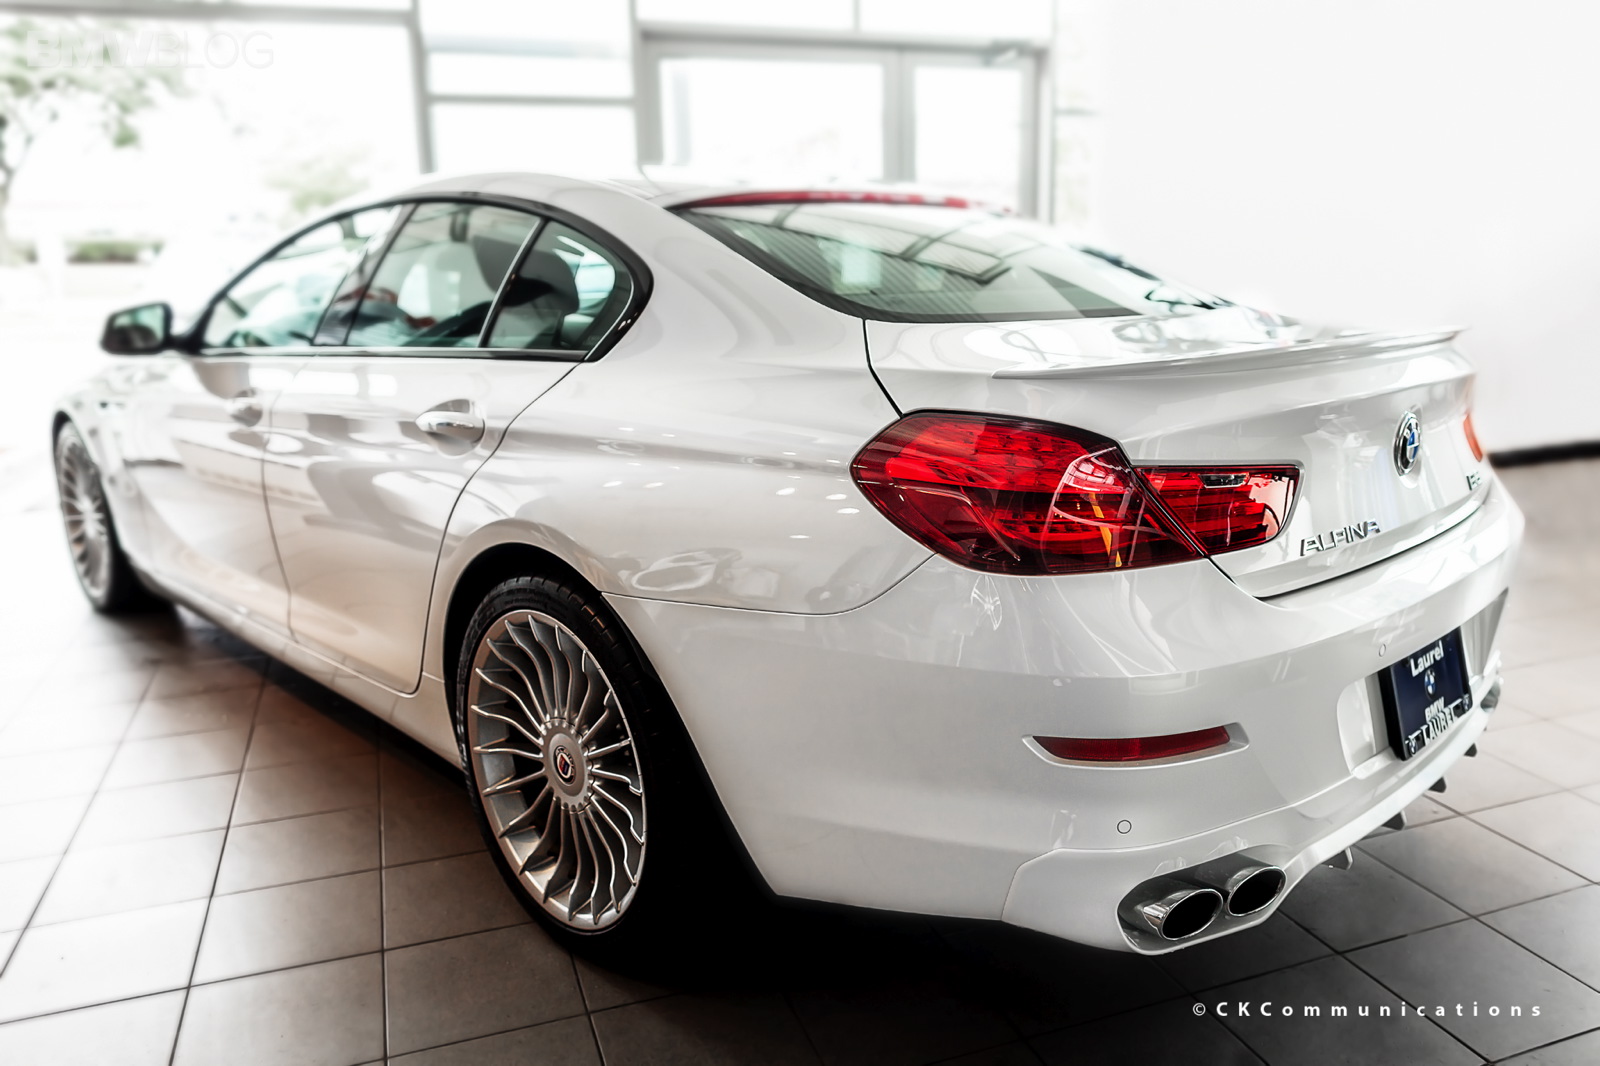 2015 BMW Alpina B6 Gran Coupe Backgrounds, Compatible - PC, Mobile, Gadgets| 1600x1066 px